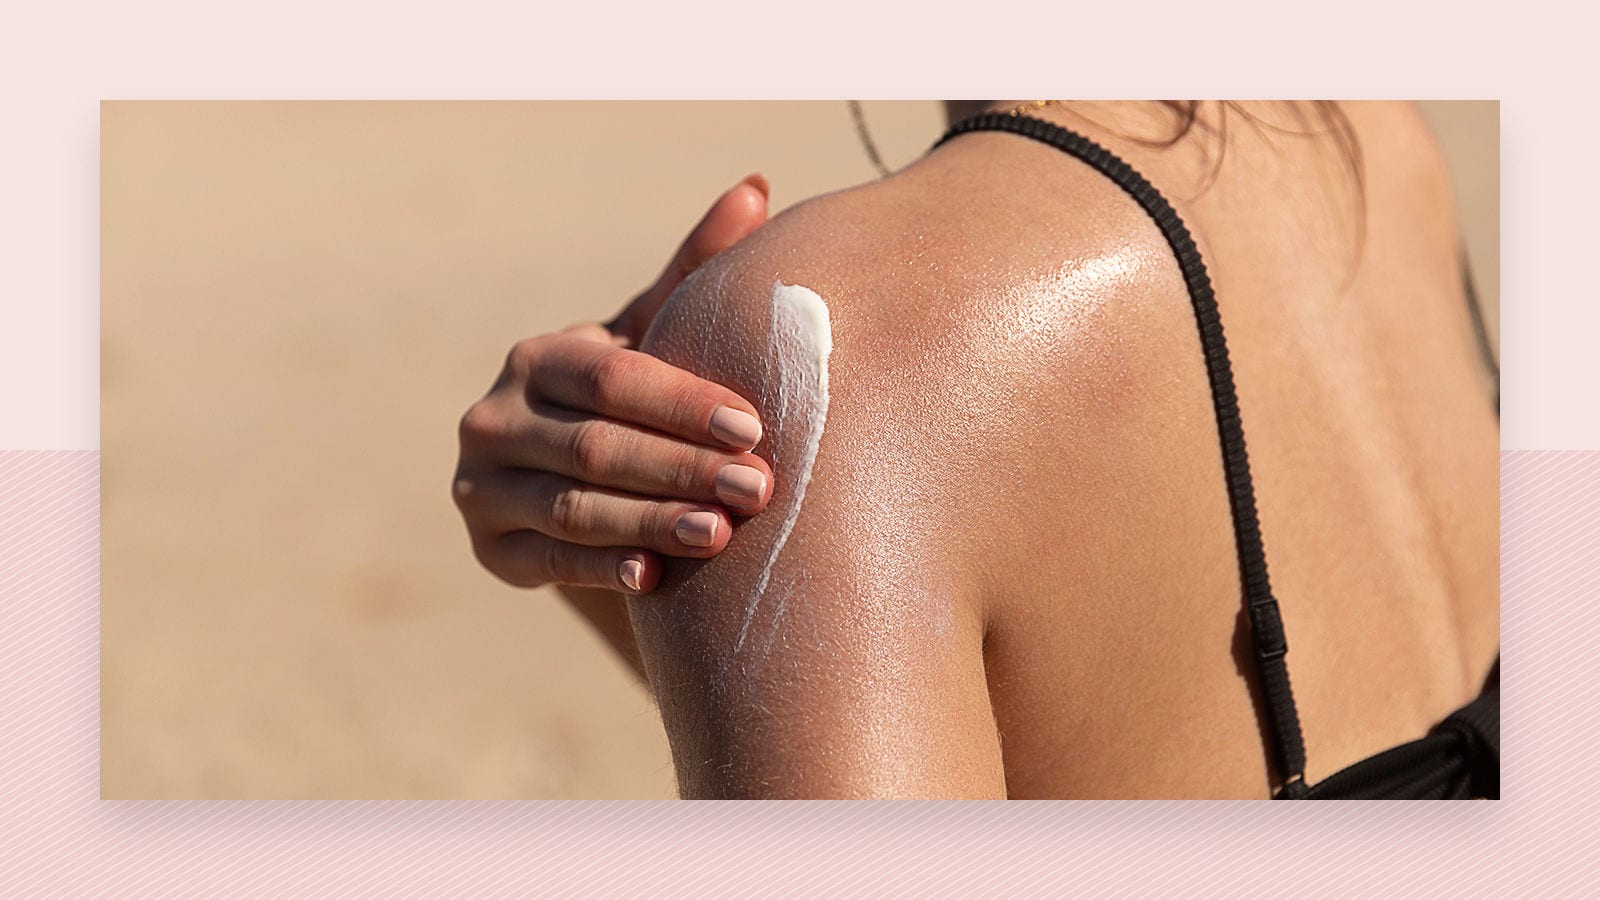 Do you need to use SPF while having laser hair removal